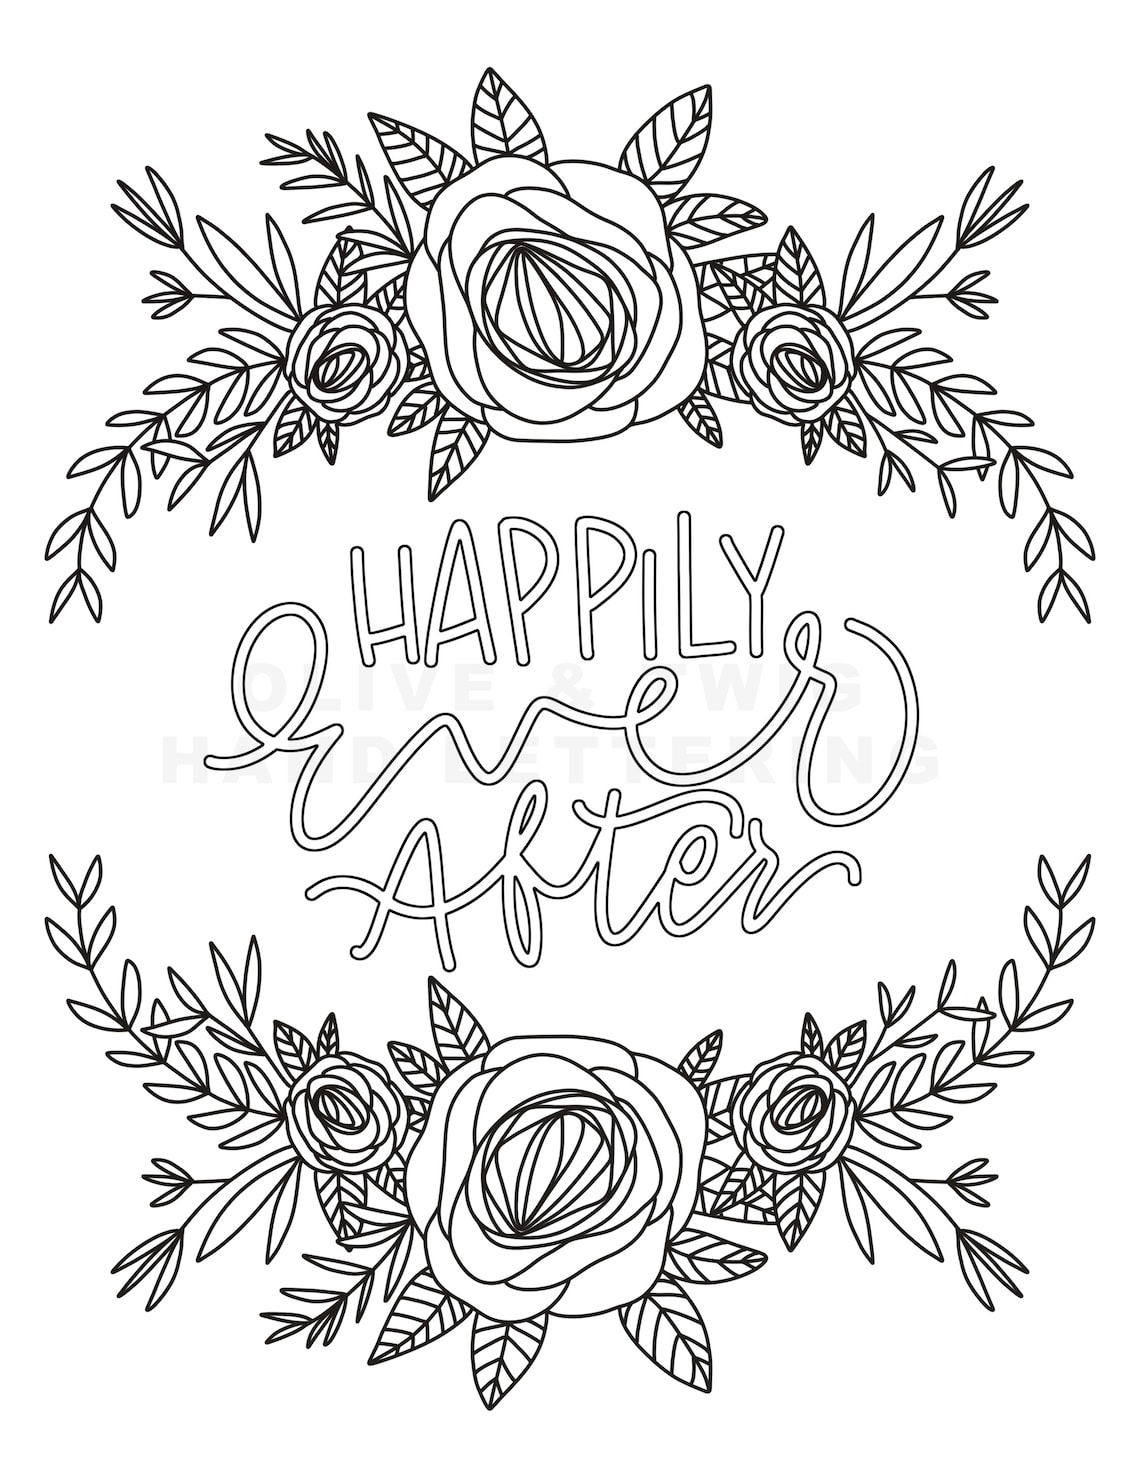 coloring-page-wedding-coloring-page-custom-coloring-page-etsy